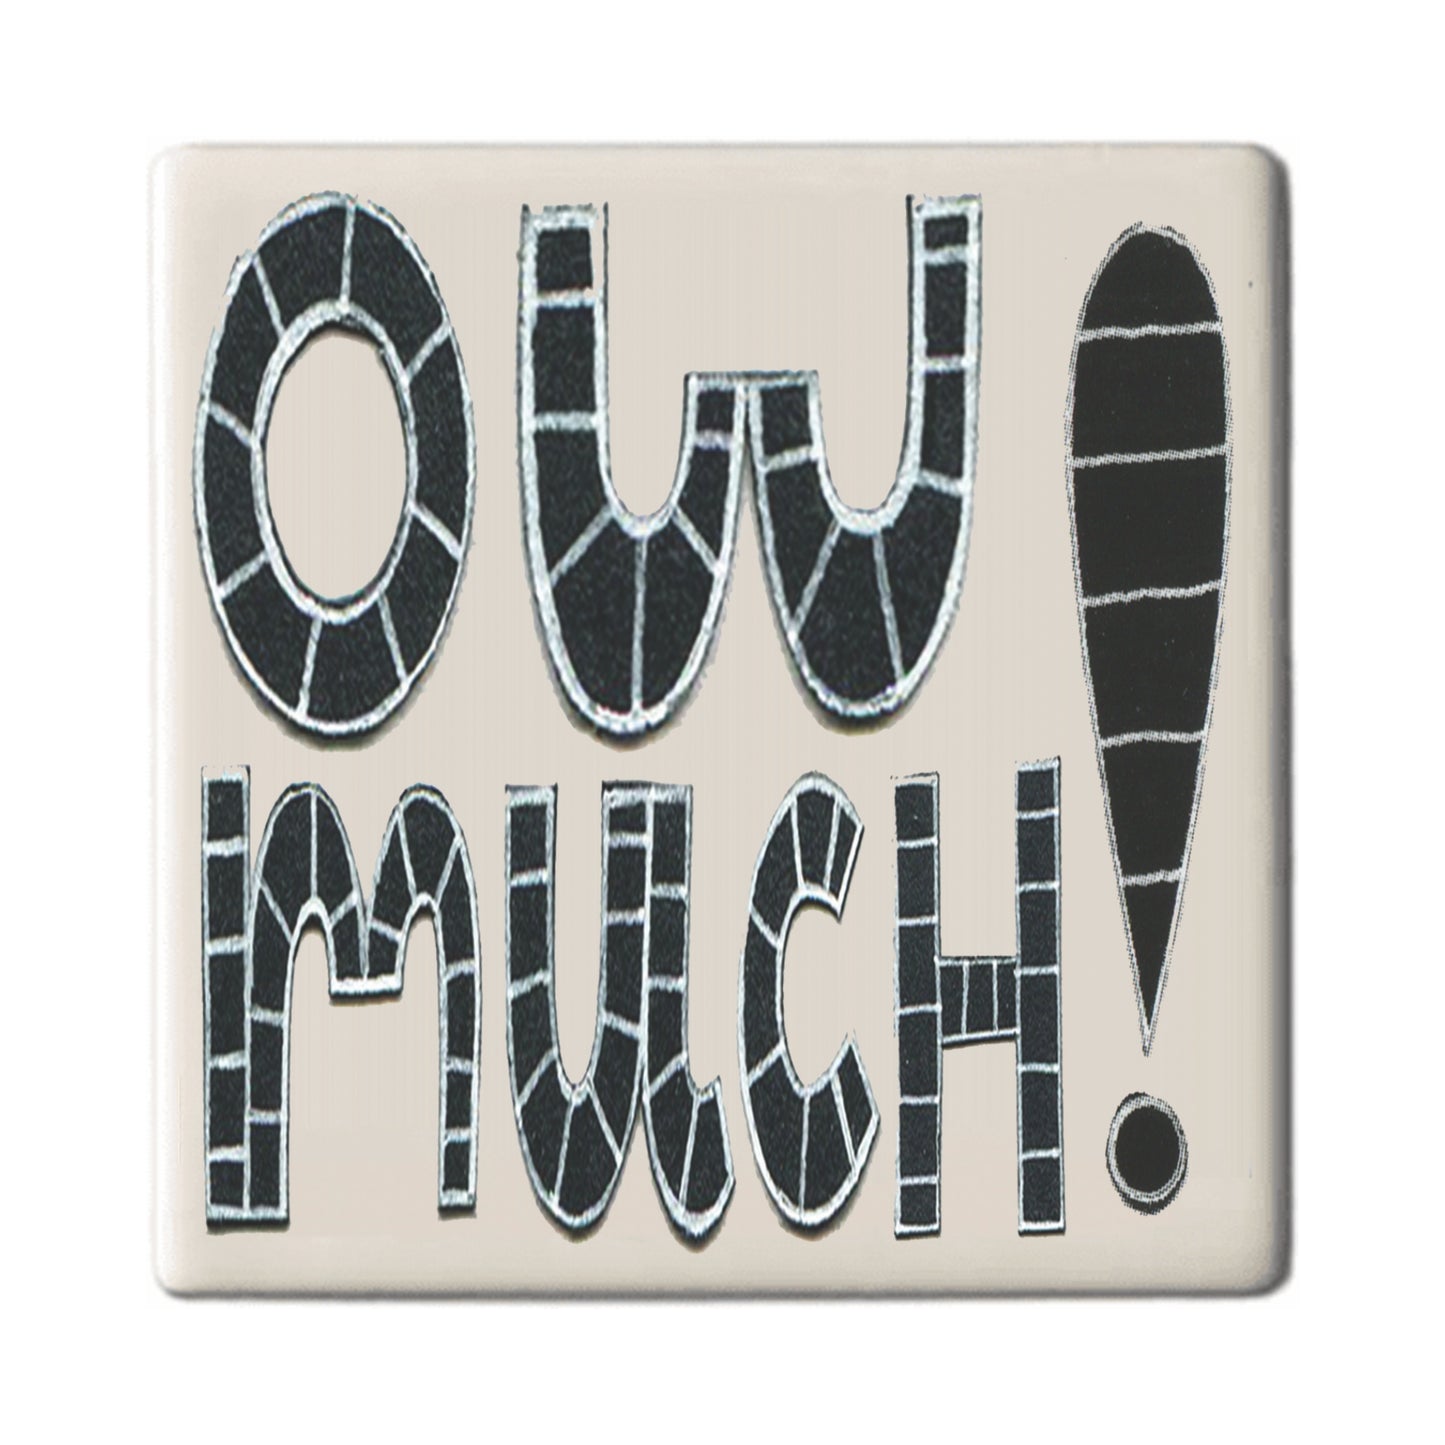 Ow Much! Coaster - The Great Yorkshire Shop